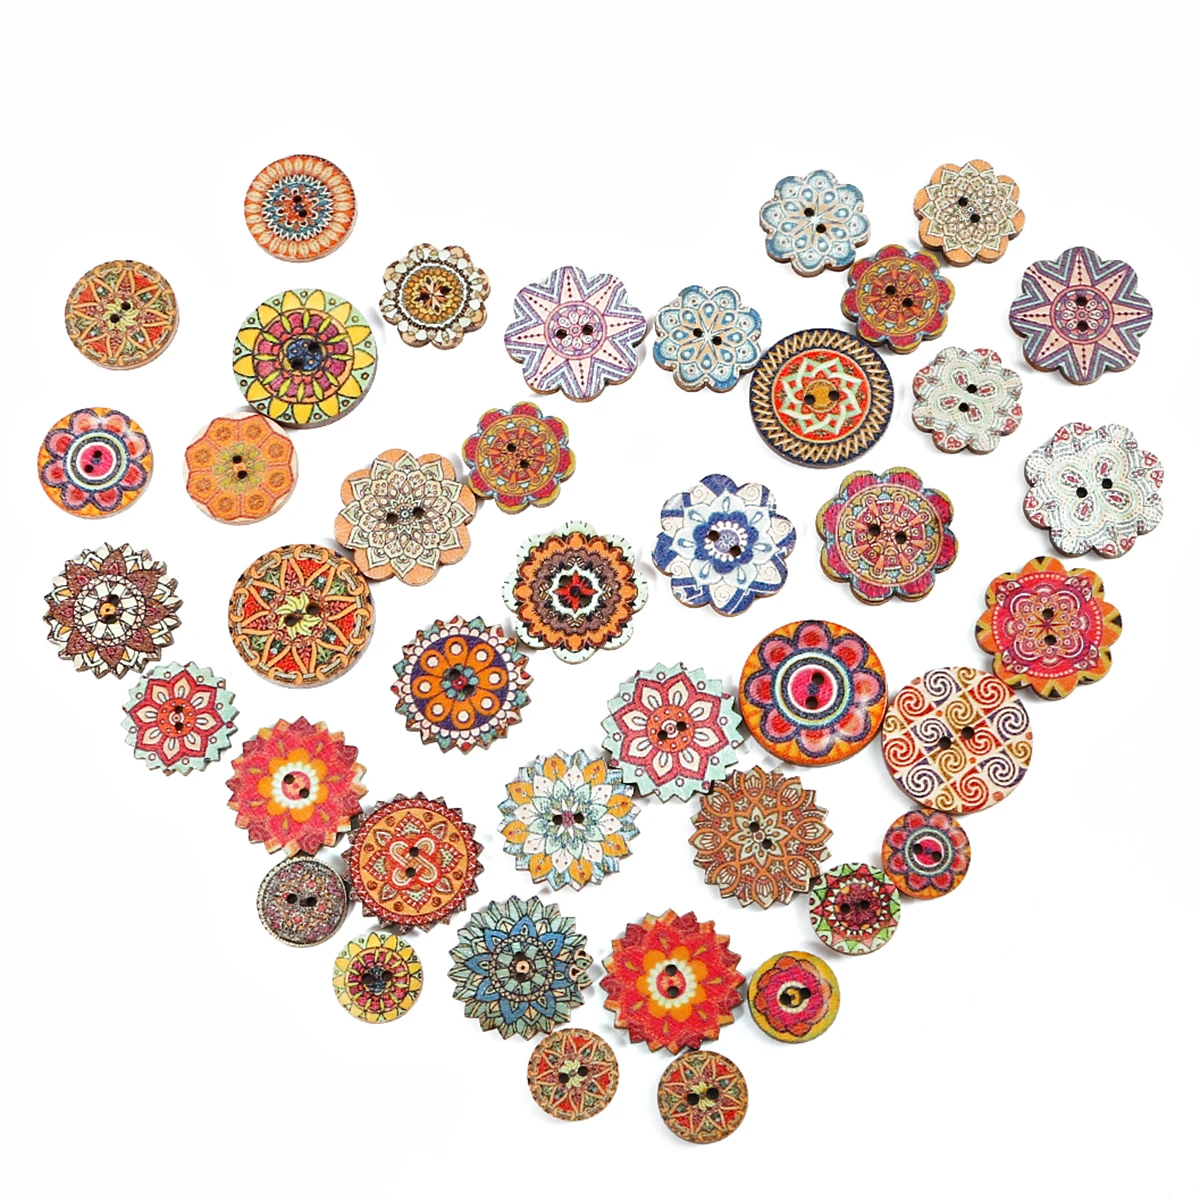 

Wholesale 50pcs/lots Mixed Color Natural Wooden 2 Holes Buttons Vintage Round Sewing Buttons Prints Pattern Sewing Accessories